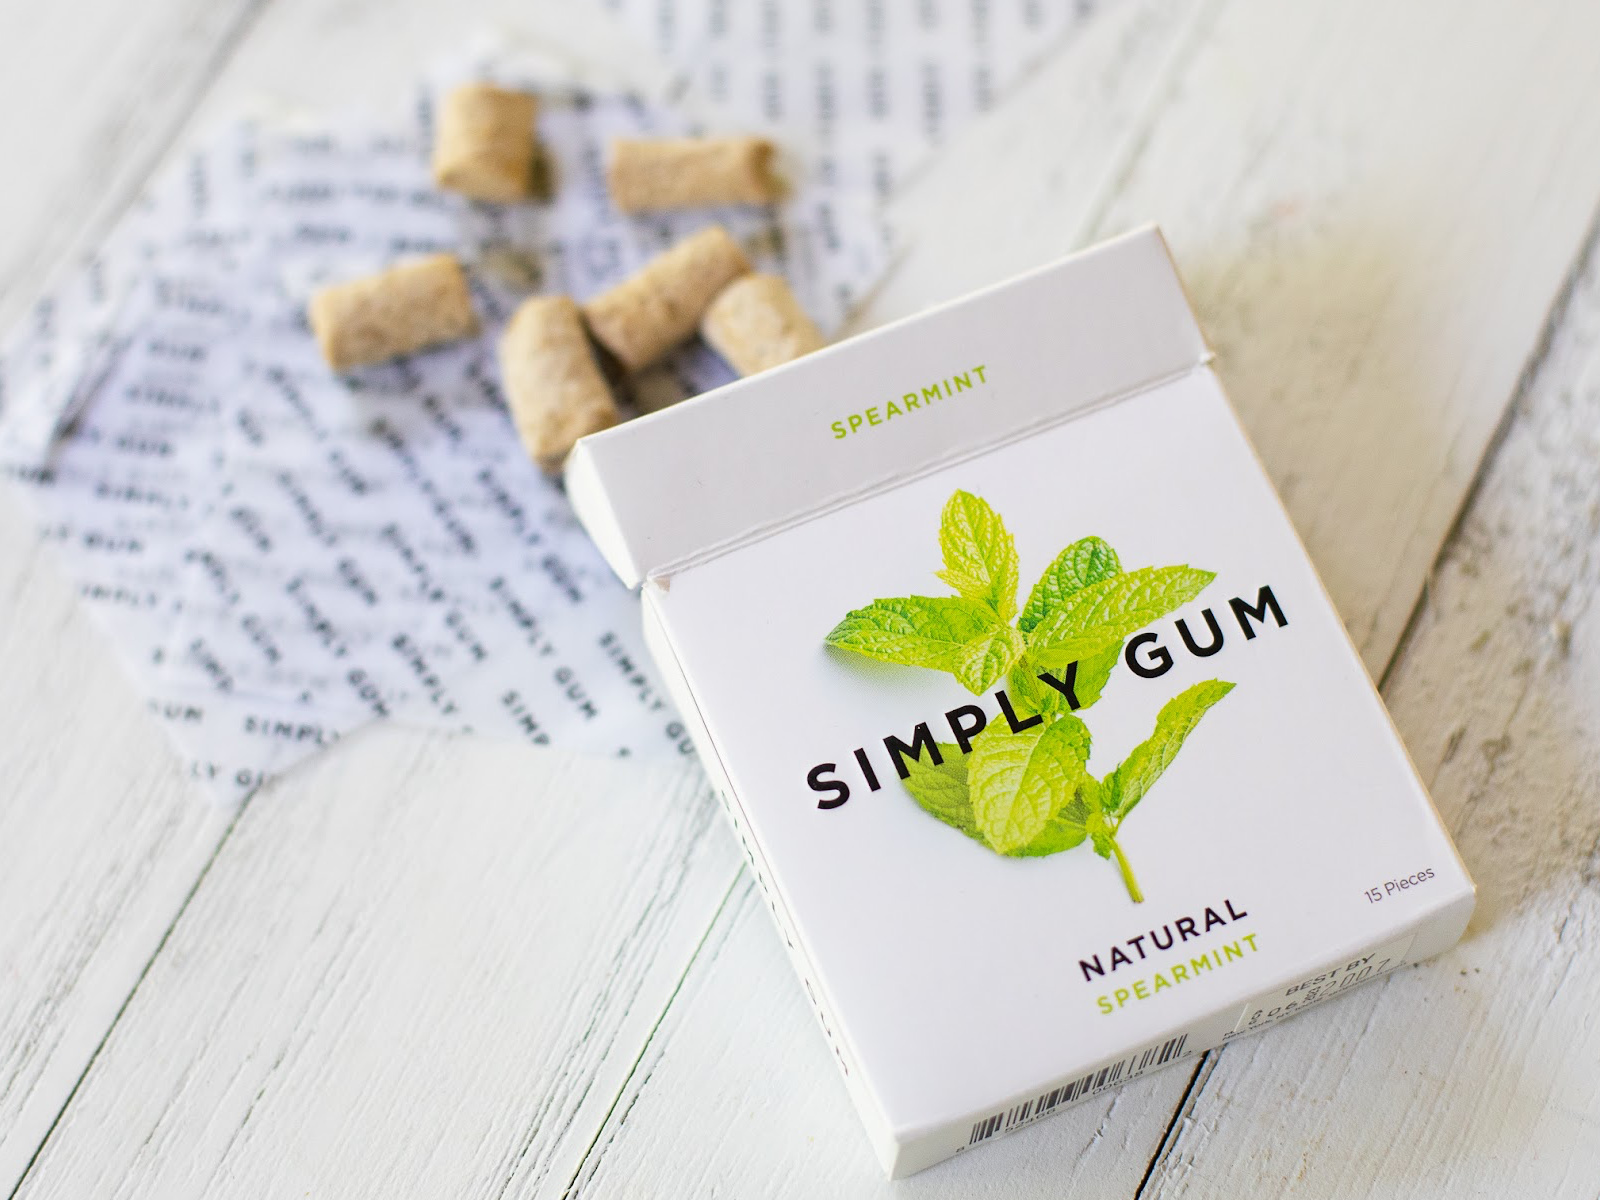 Get A Pack Of Simply Gum For Just 19¢ At Publix